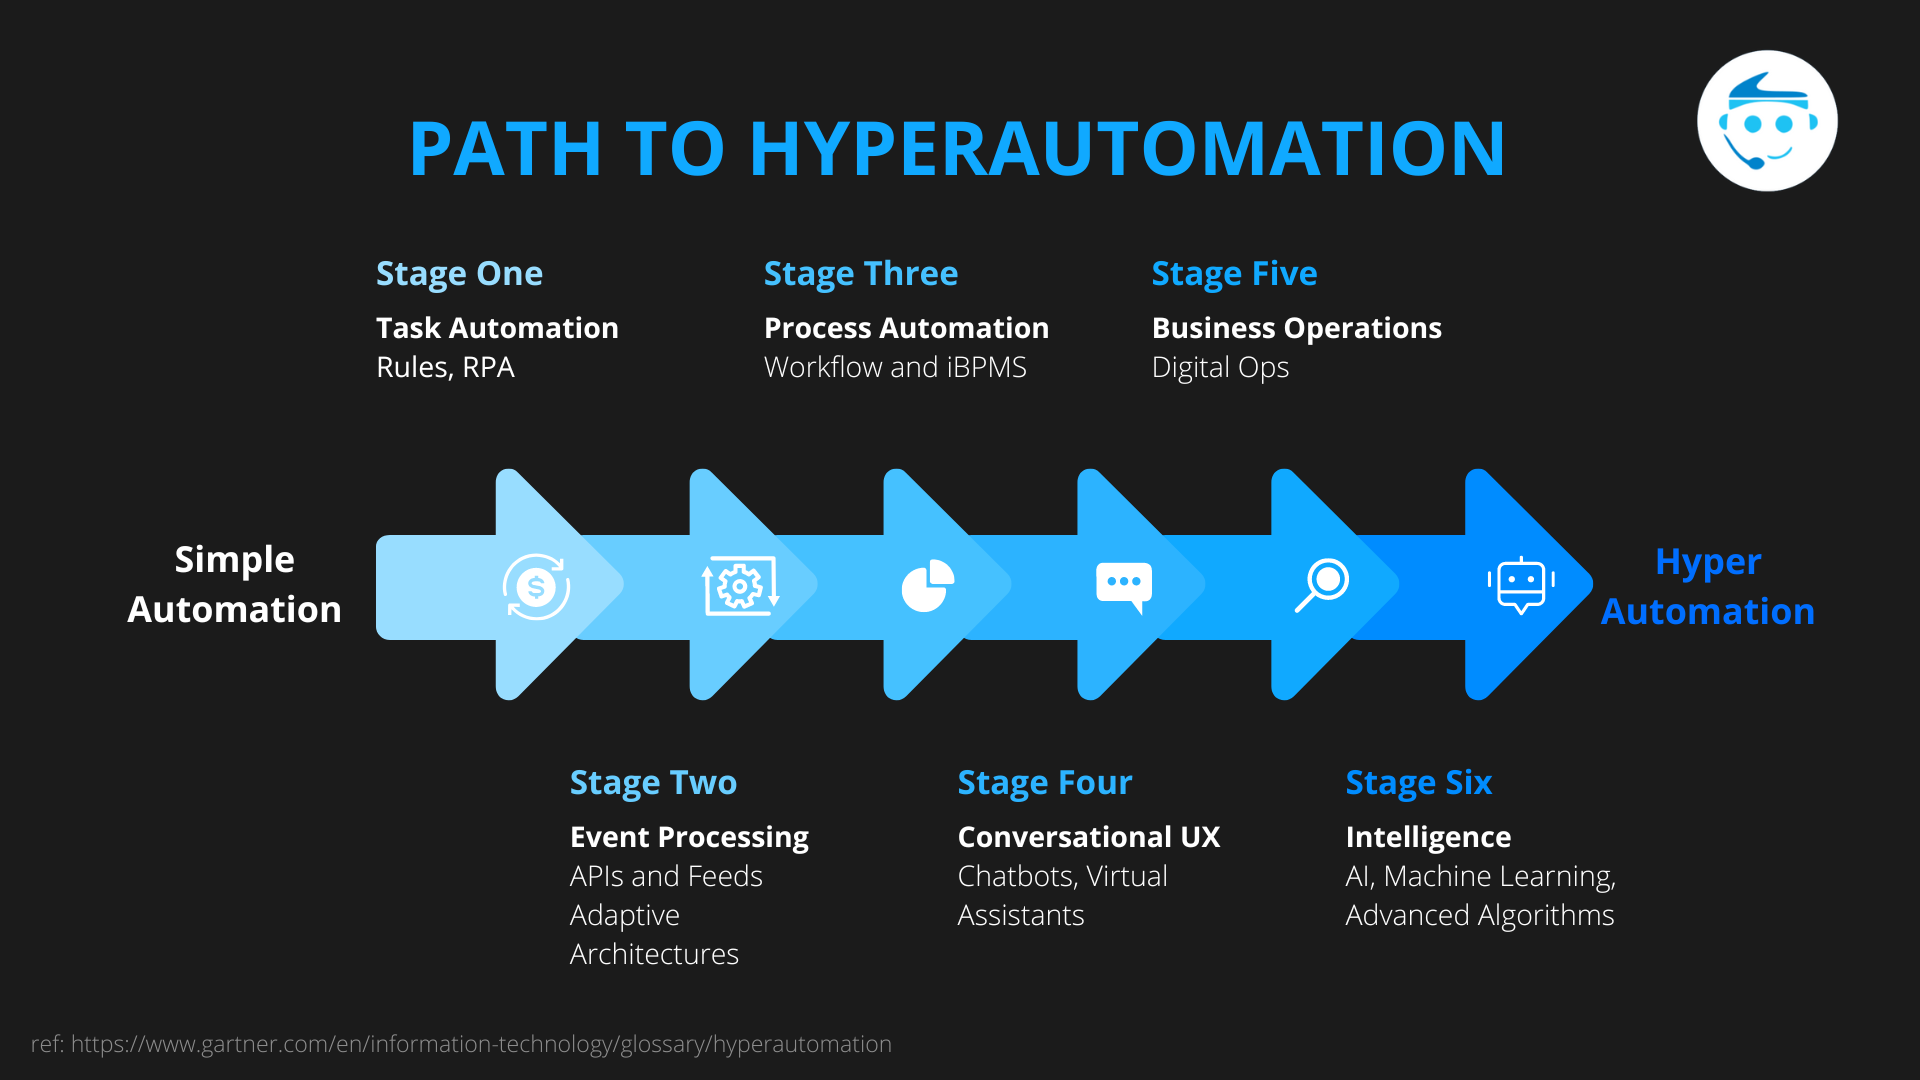 The six steps in the Hyperautomation Journey: Task Automation, Event Processing, Process Automation, Conversational UX, Business Operations, and Intelligence.